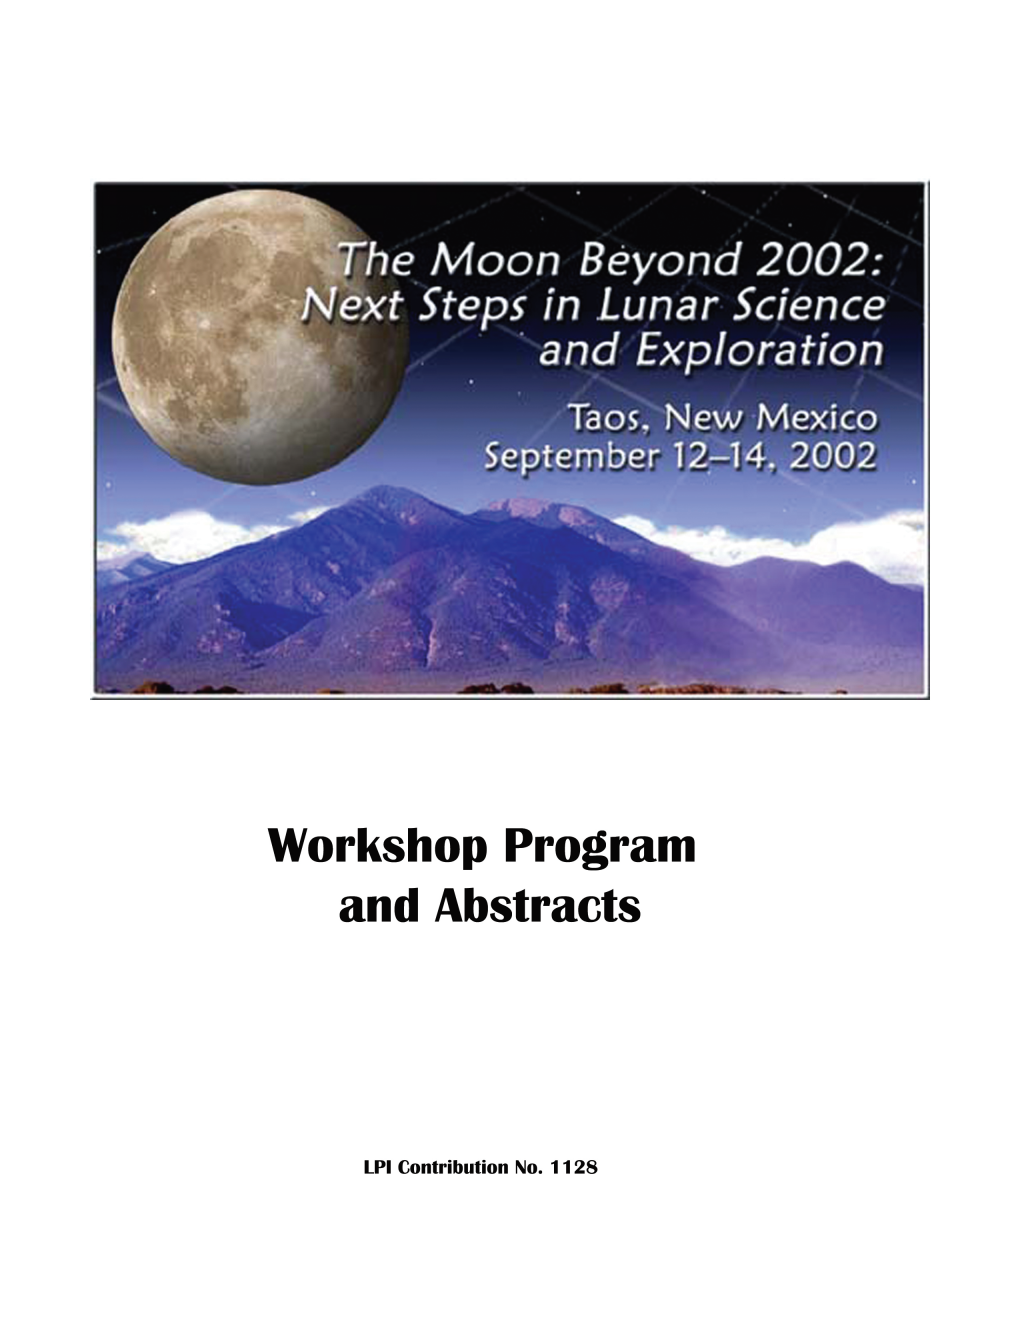 The Moon Beyond 2002: Next Steps in Lunar Science and Exploration